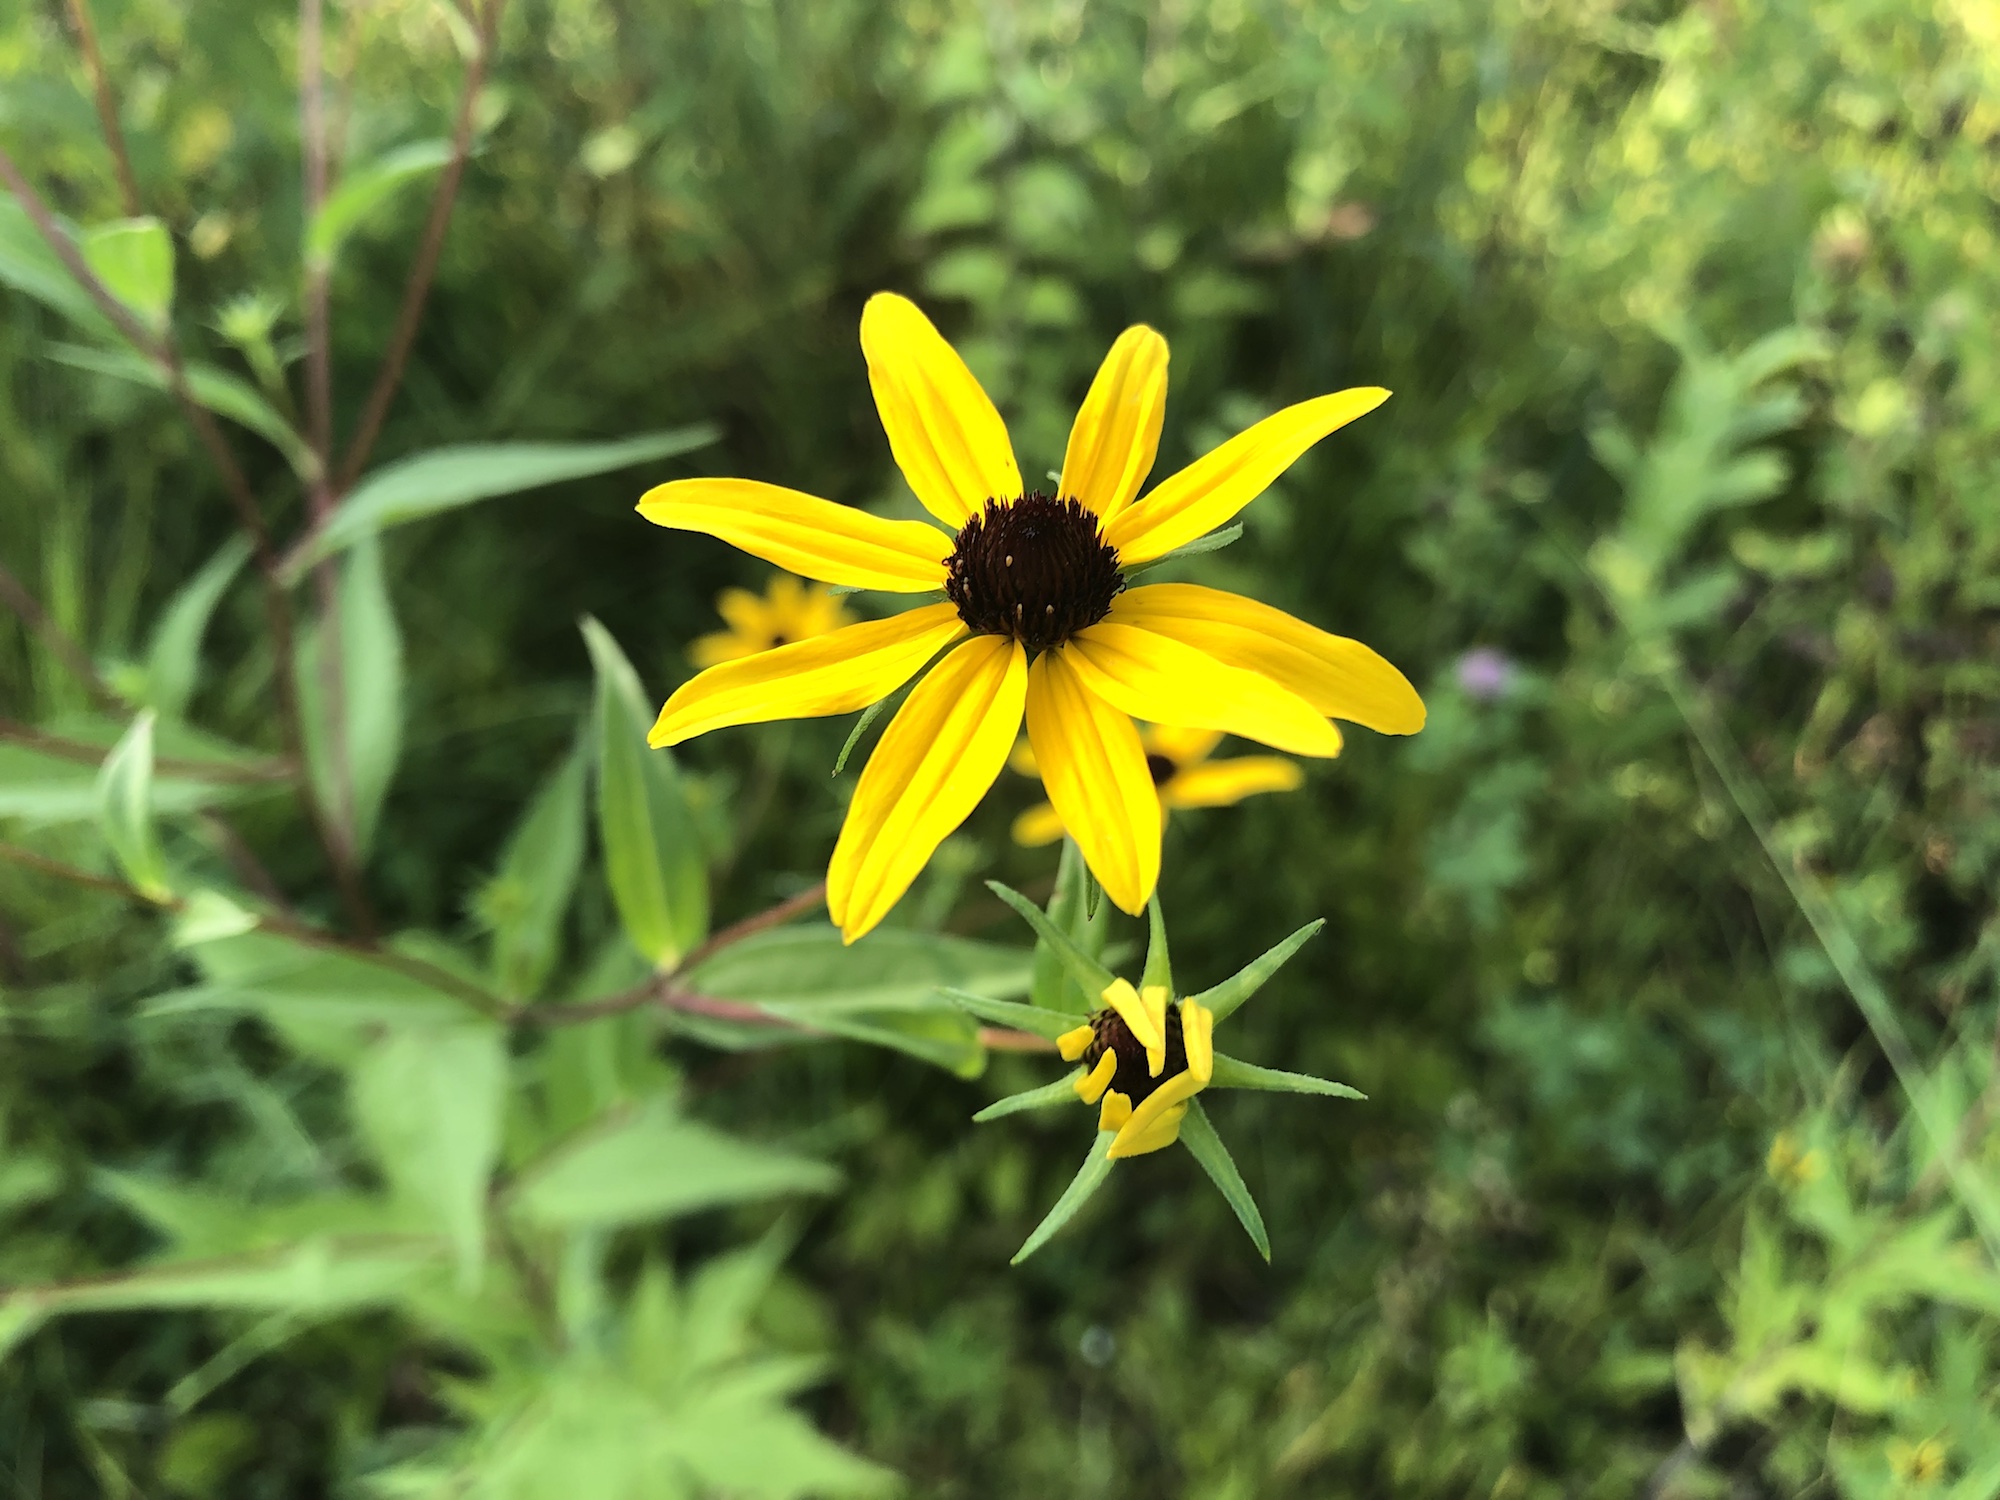 Brown-eyed Susan on banks of retaining pond in Madison, Wisconsin on July 28, 2019.